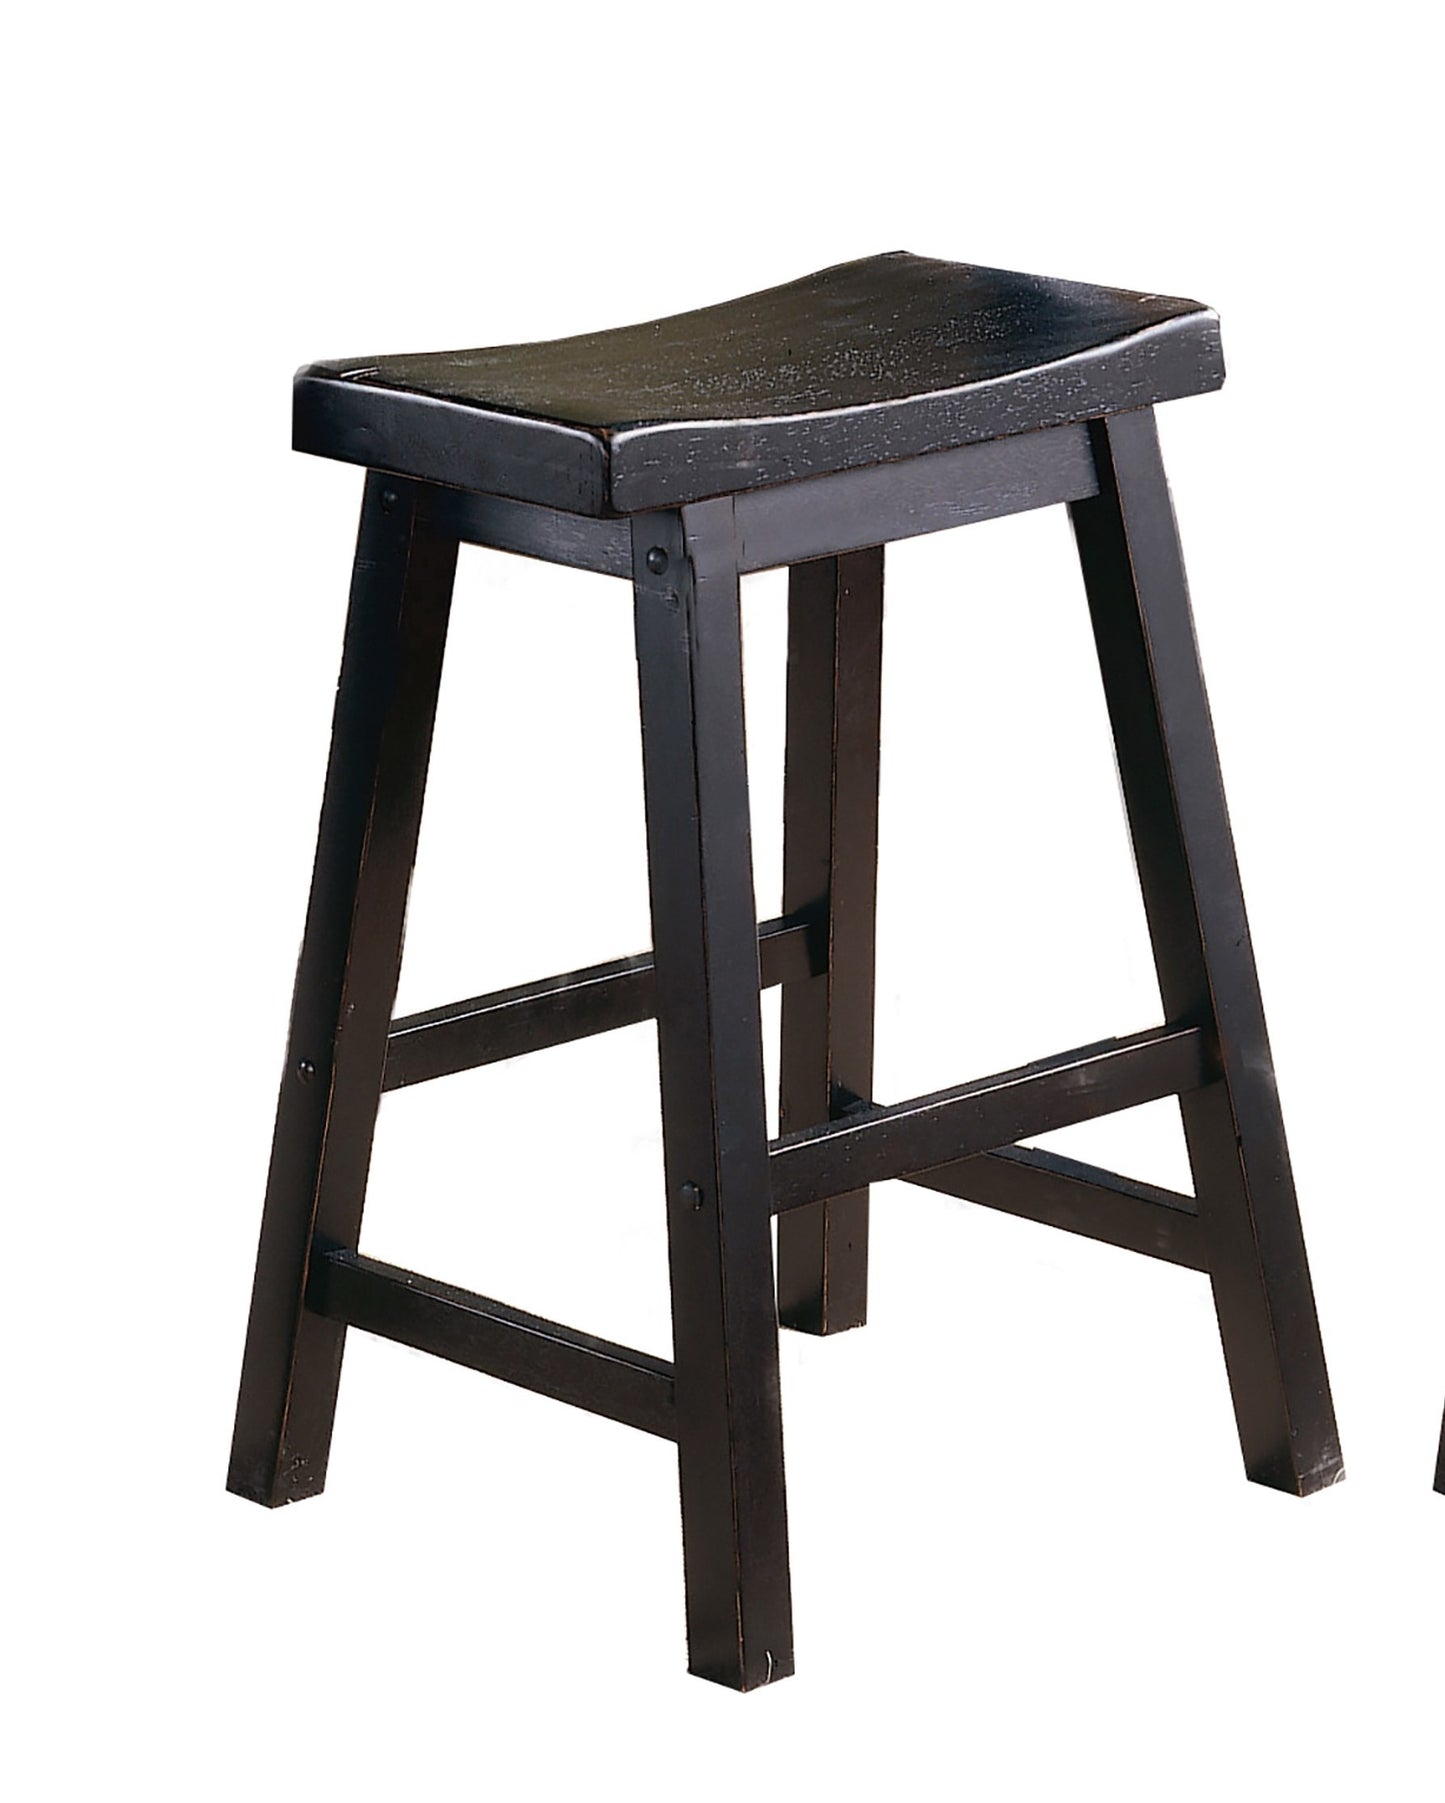 Black Finish 24-inch Counter Height Stools Set of 2pc Saddle Seat Solid Wood Casual Dining Home Furniture